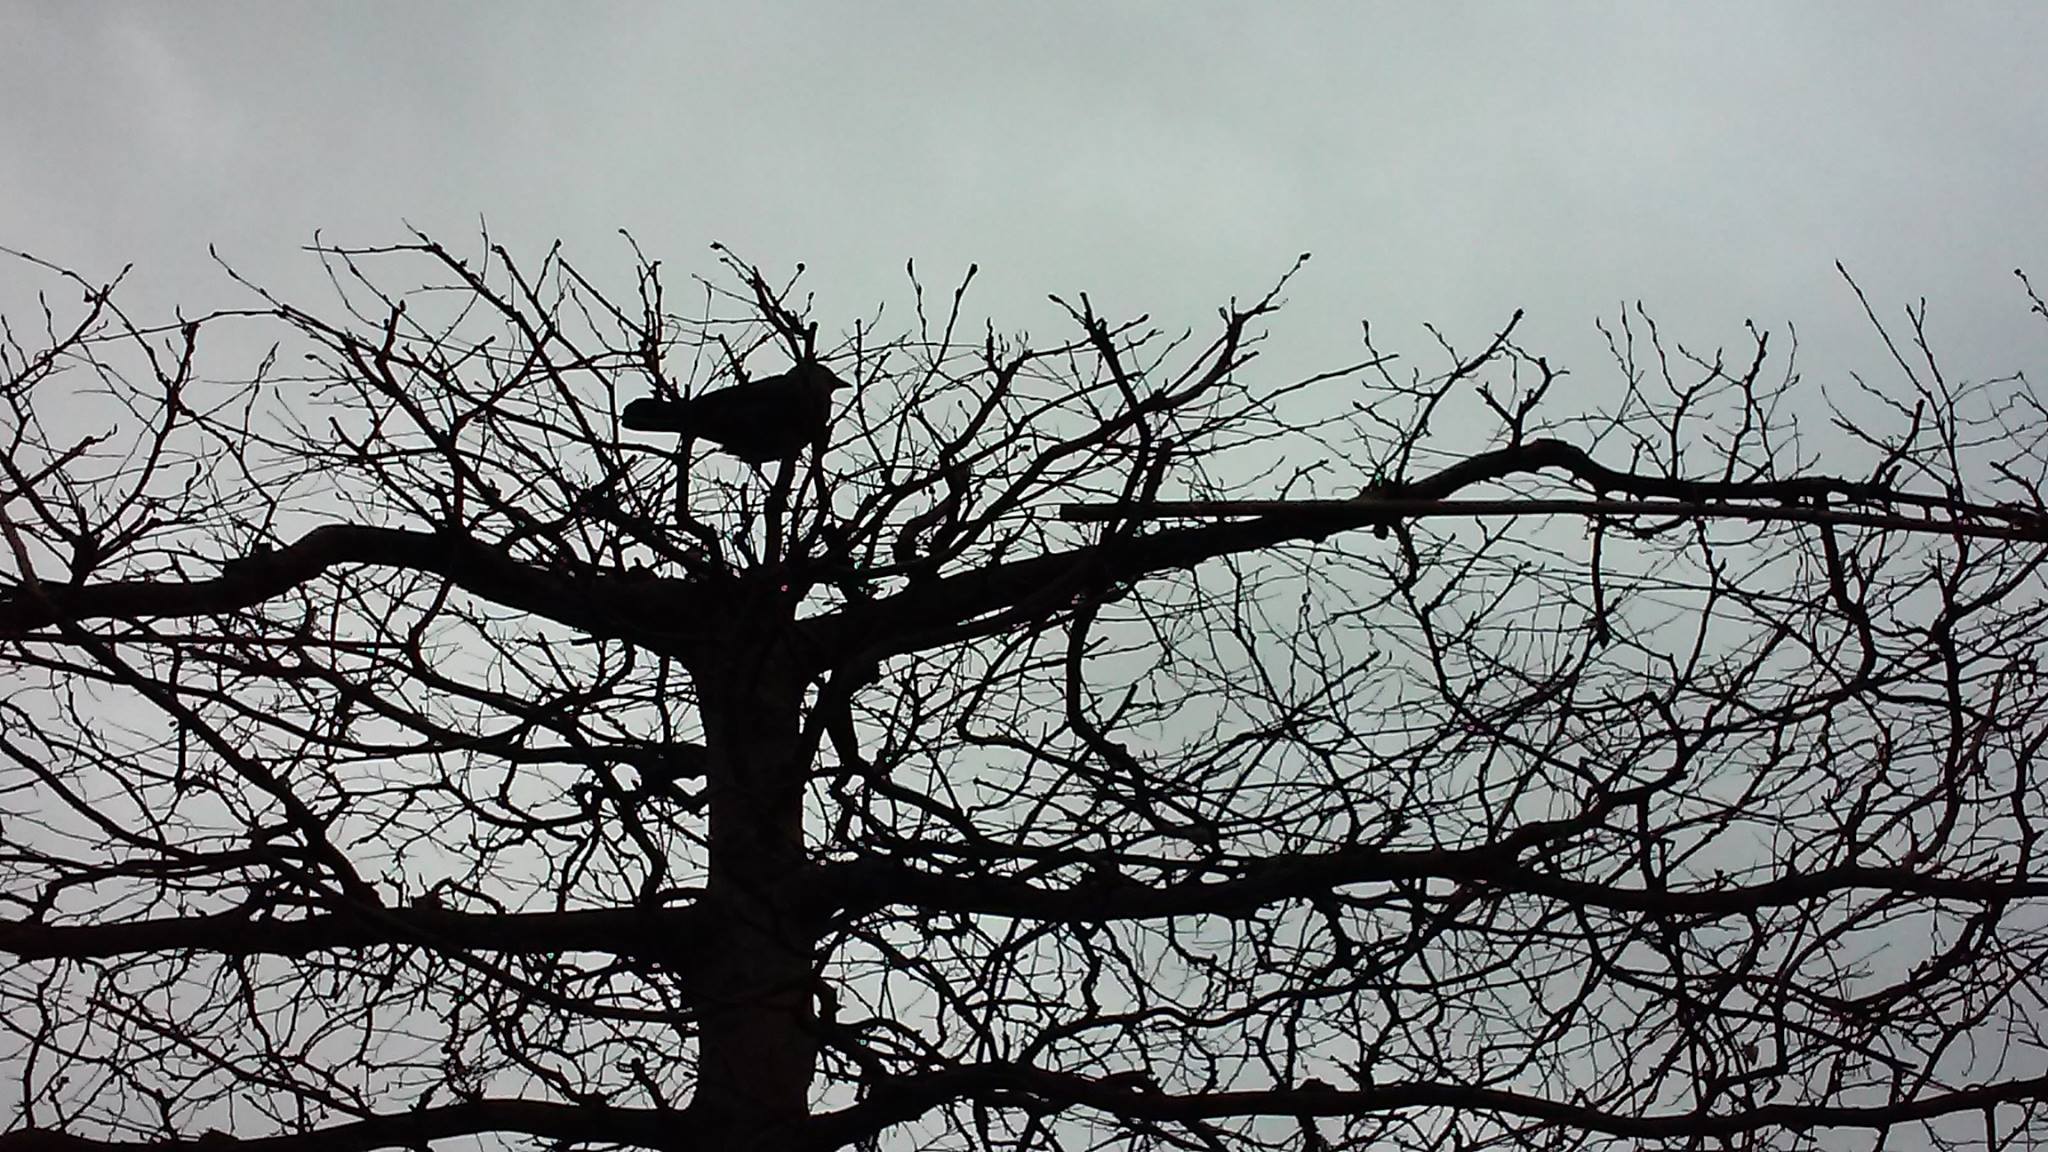 the silhouette of a bird in a tree with no leaves